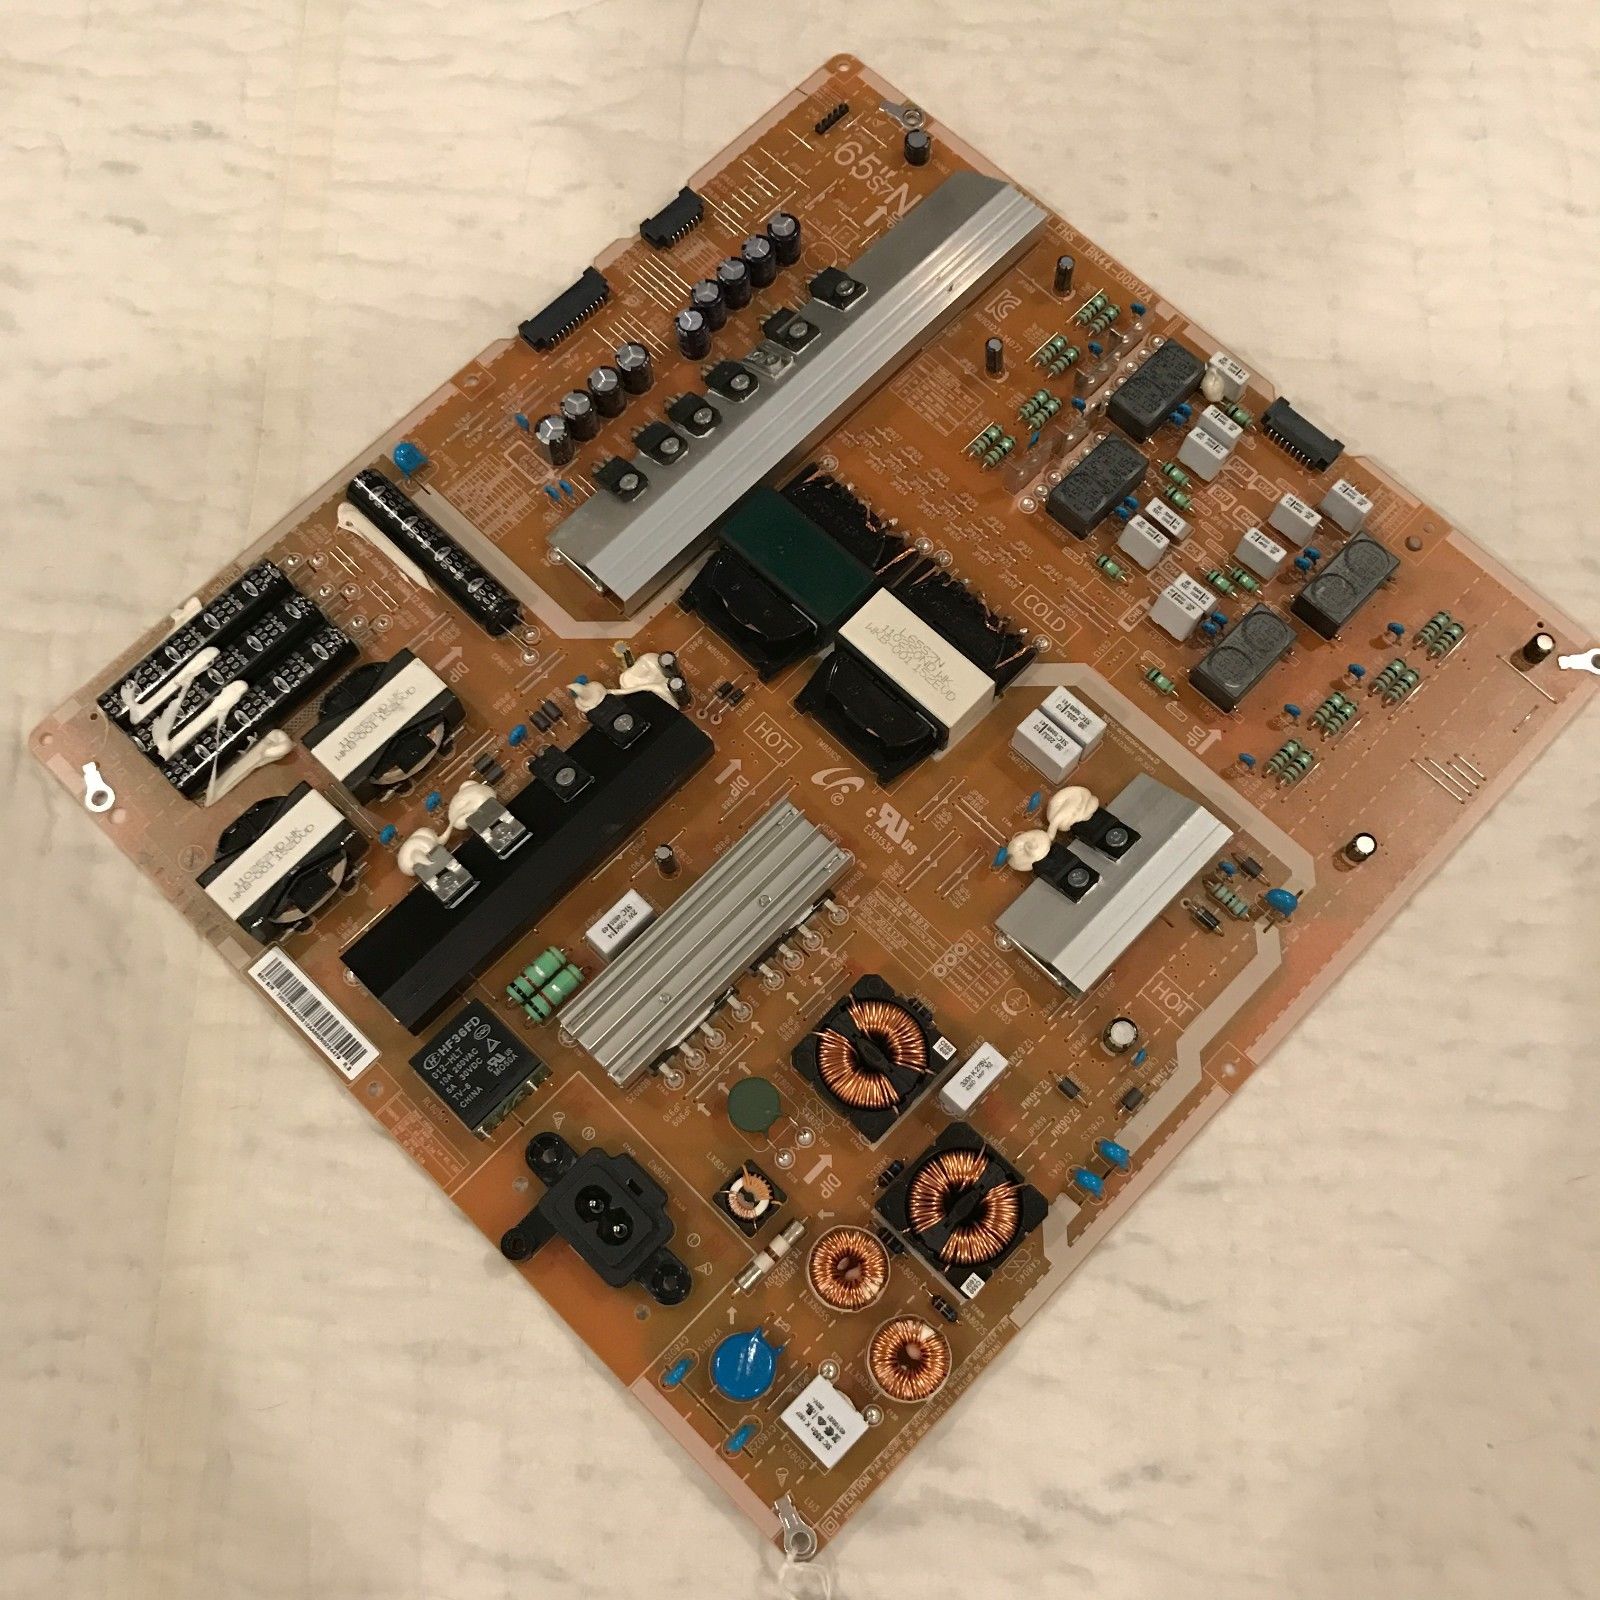 SAMSUNG BN44-00812A POWER SUPPLY BOARD FOR UN65JU7100 AND OTHER